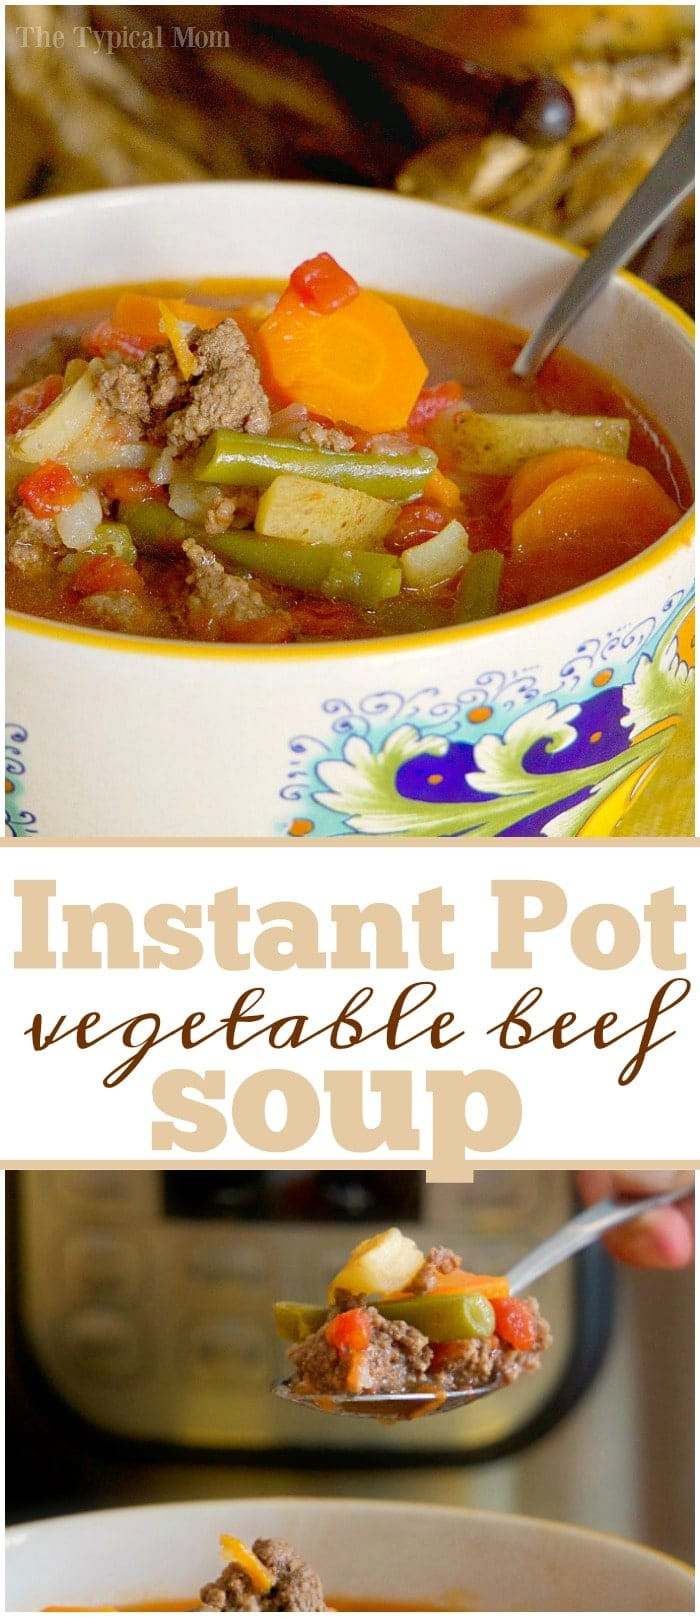 Beef Soup Instant Pot
 Best Instant Pot Ve able Beef Soup Ground Beef or